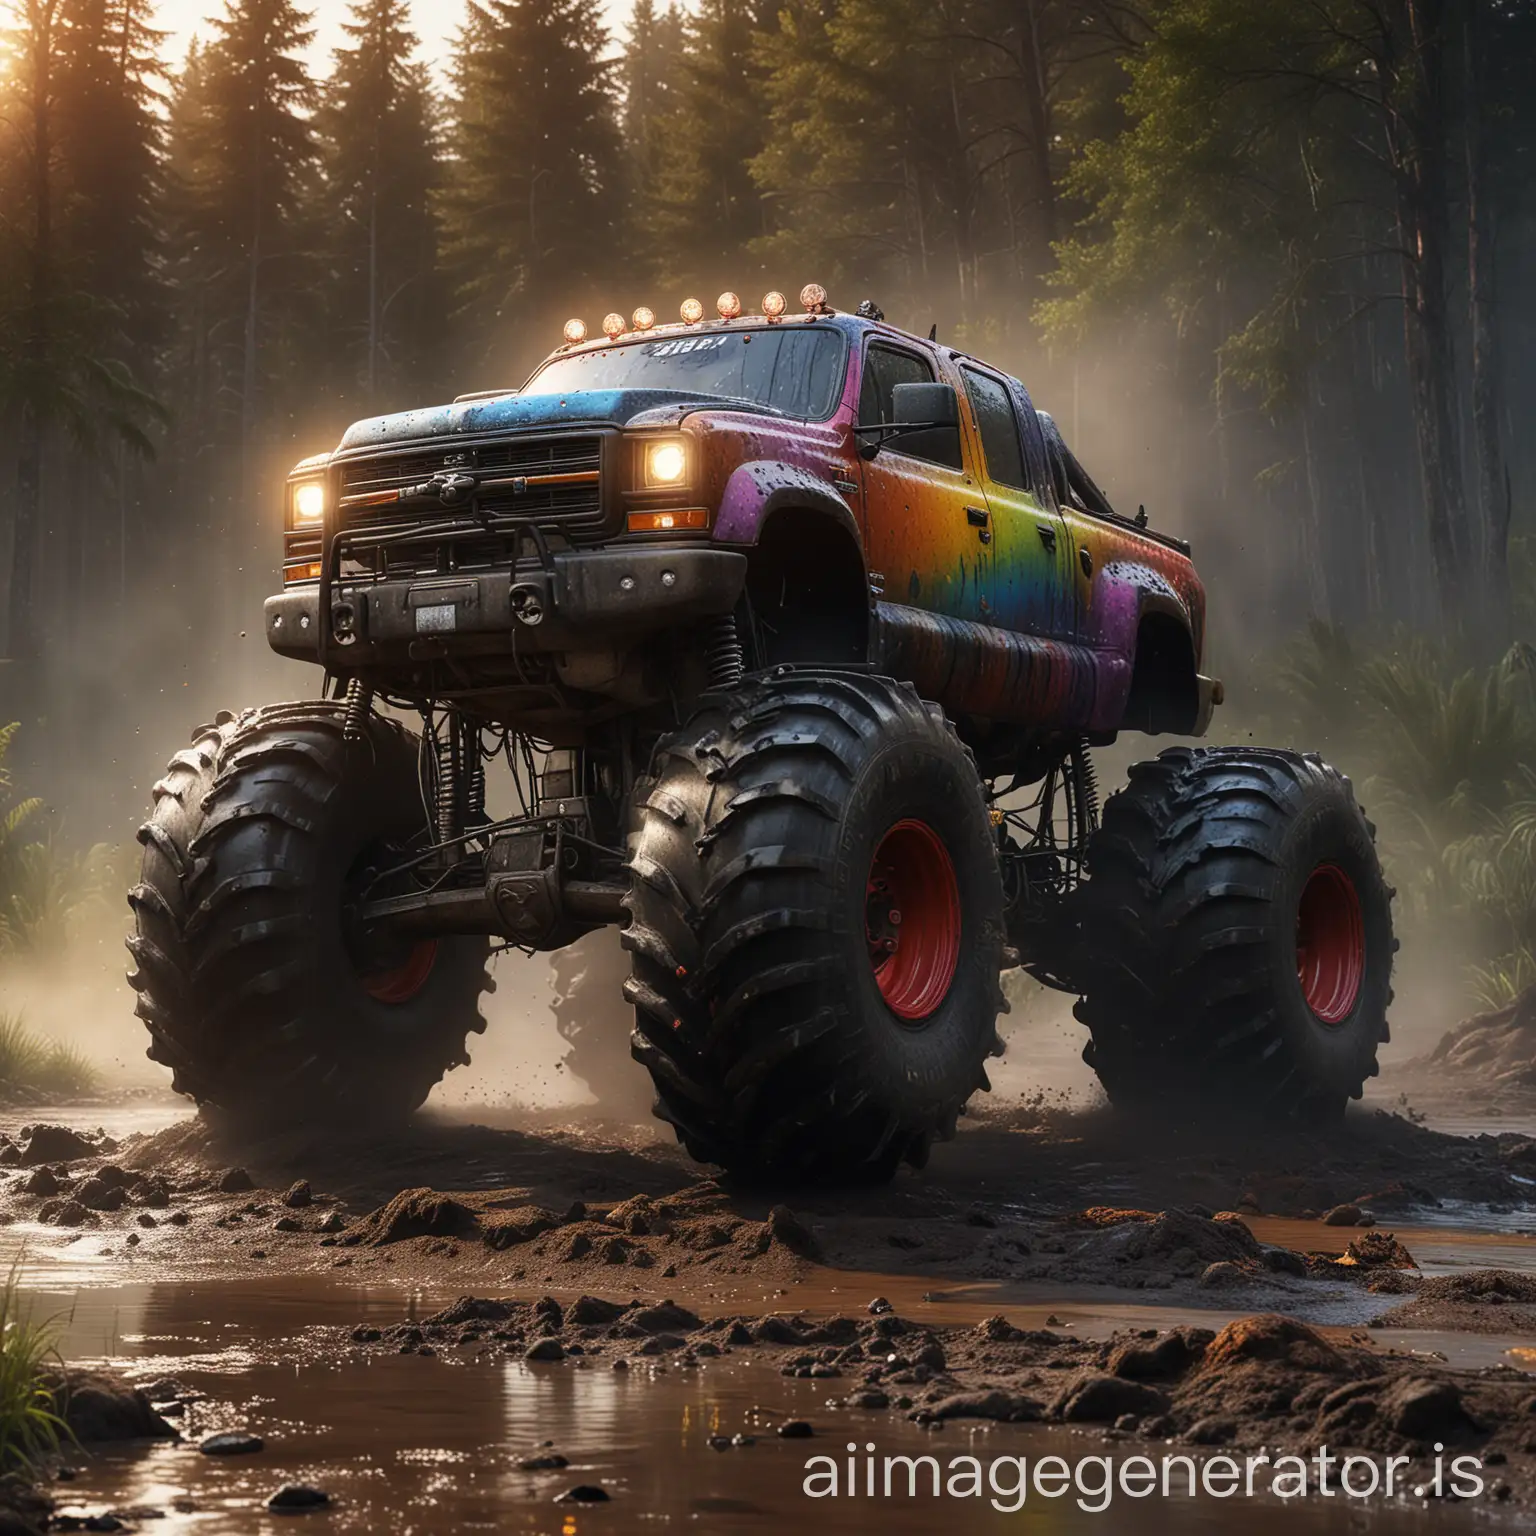 Majestic-Monster-Truck-Creature-Roaming-Through-Lush-Forest-at-Sunset